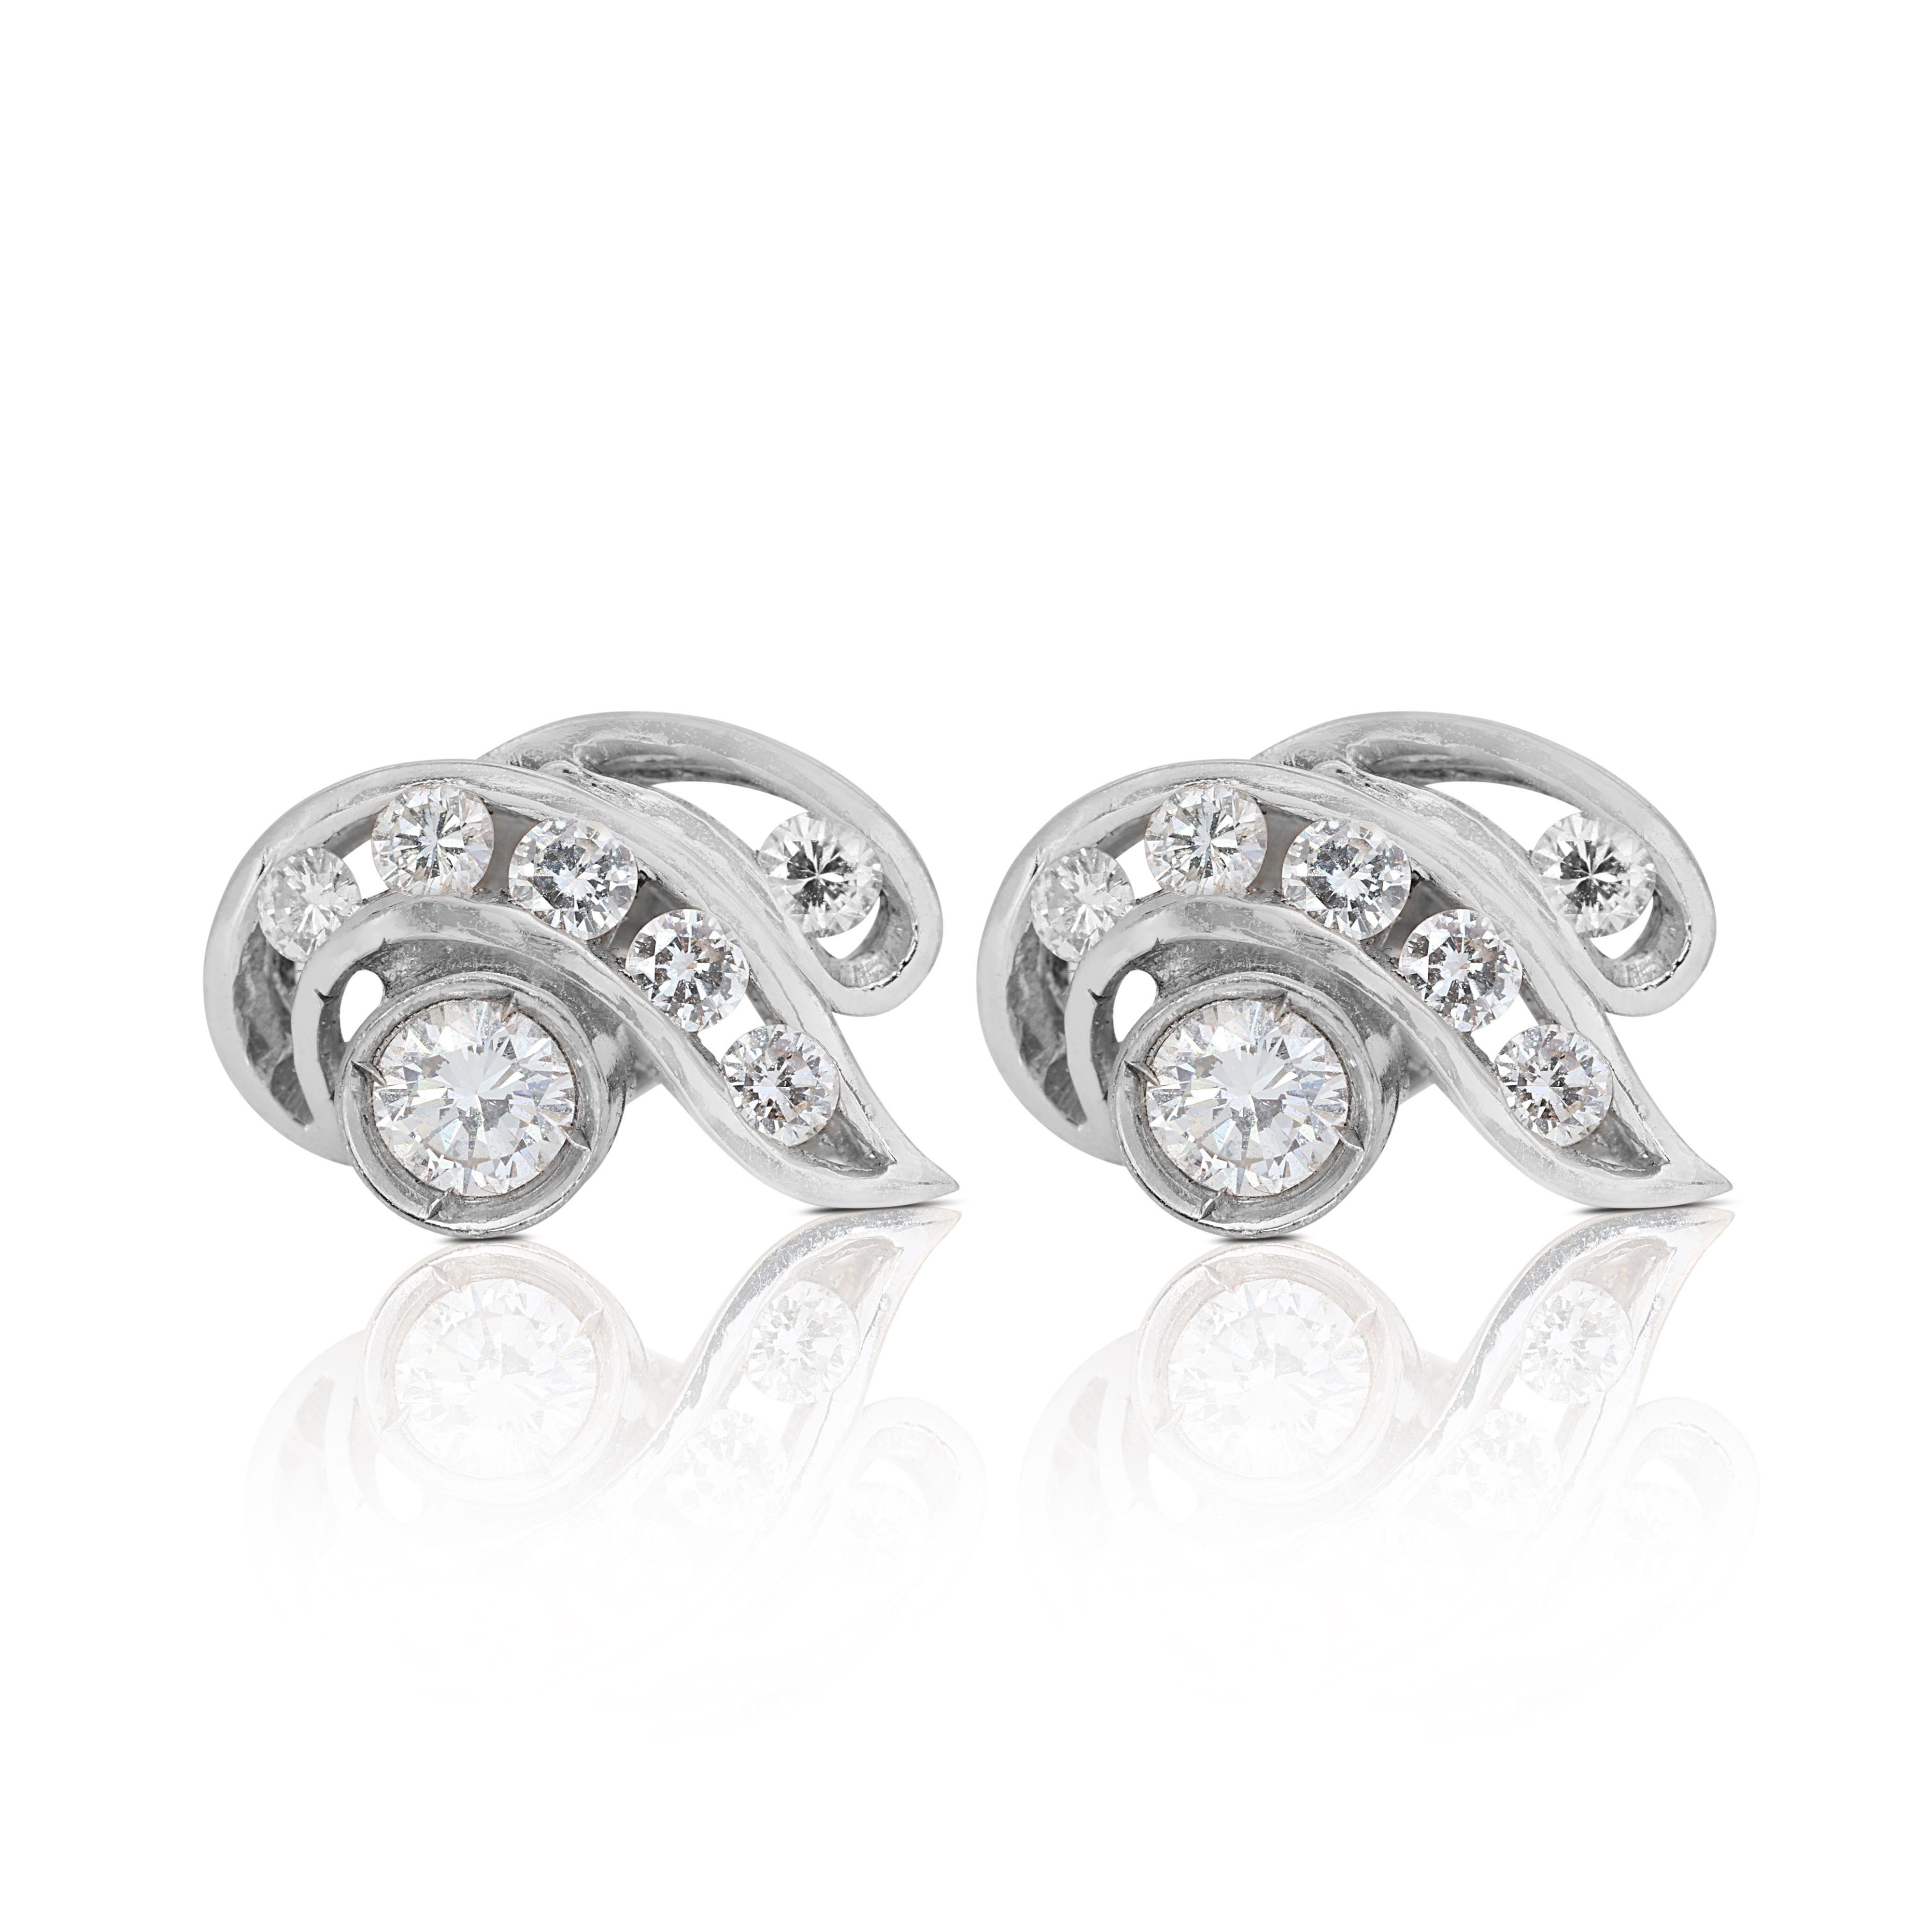 Elegant 0.66ct Diamond Earrings in 14K White Gold In New Condition For Sale In רמת גן, IL